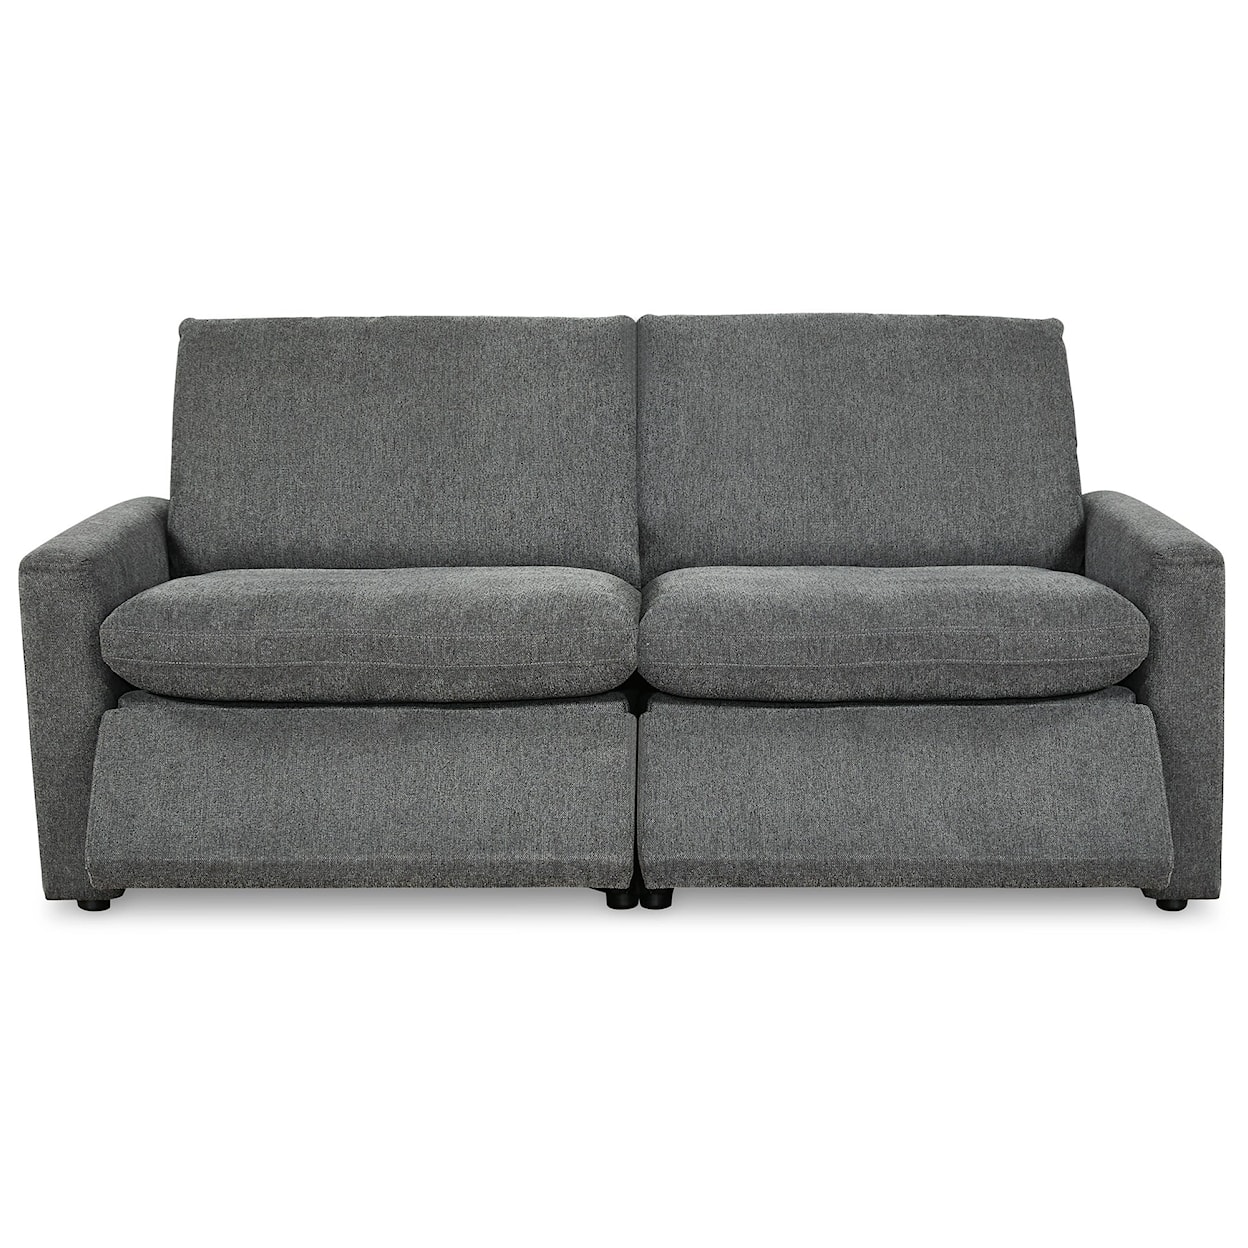 Signature Design by Ashley Hartsdale 2-Piece Power Reclining Loveseat